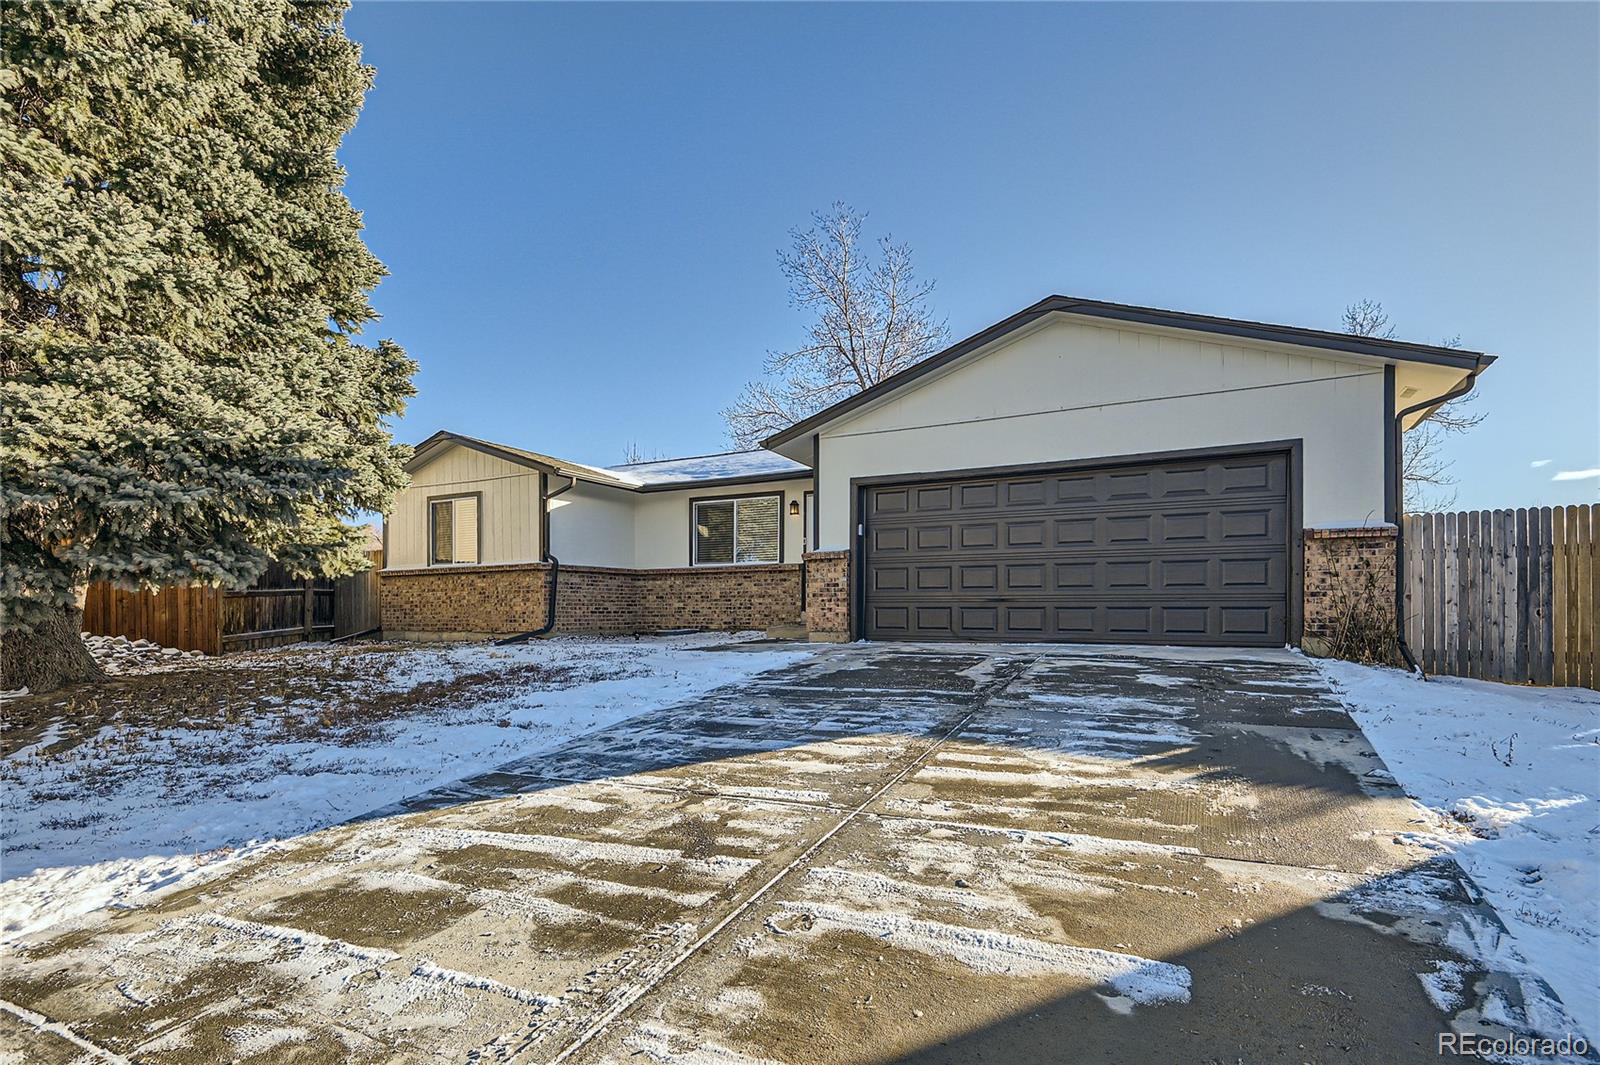 8674 w 86th place, Arvada sold home. Closed on 2024-02-09 for $530,000.